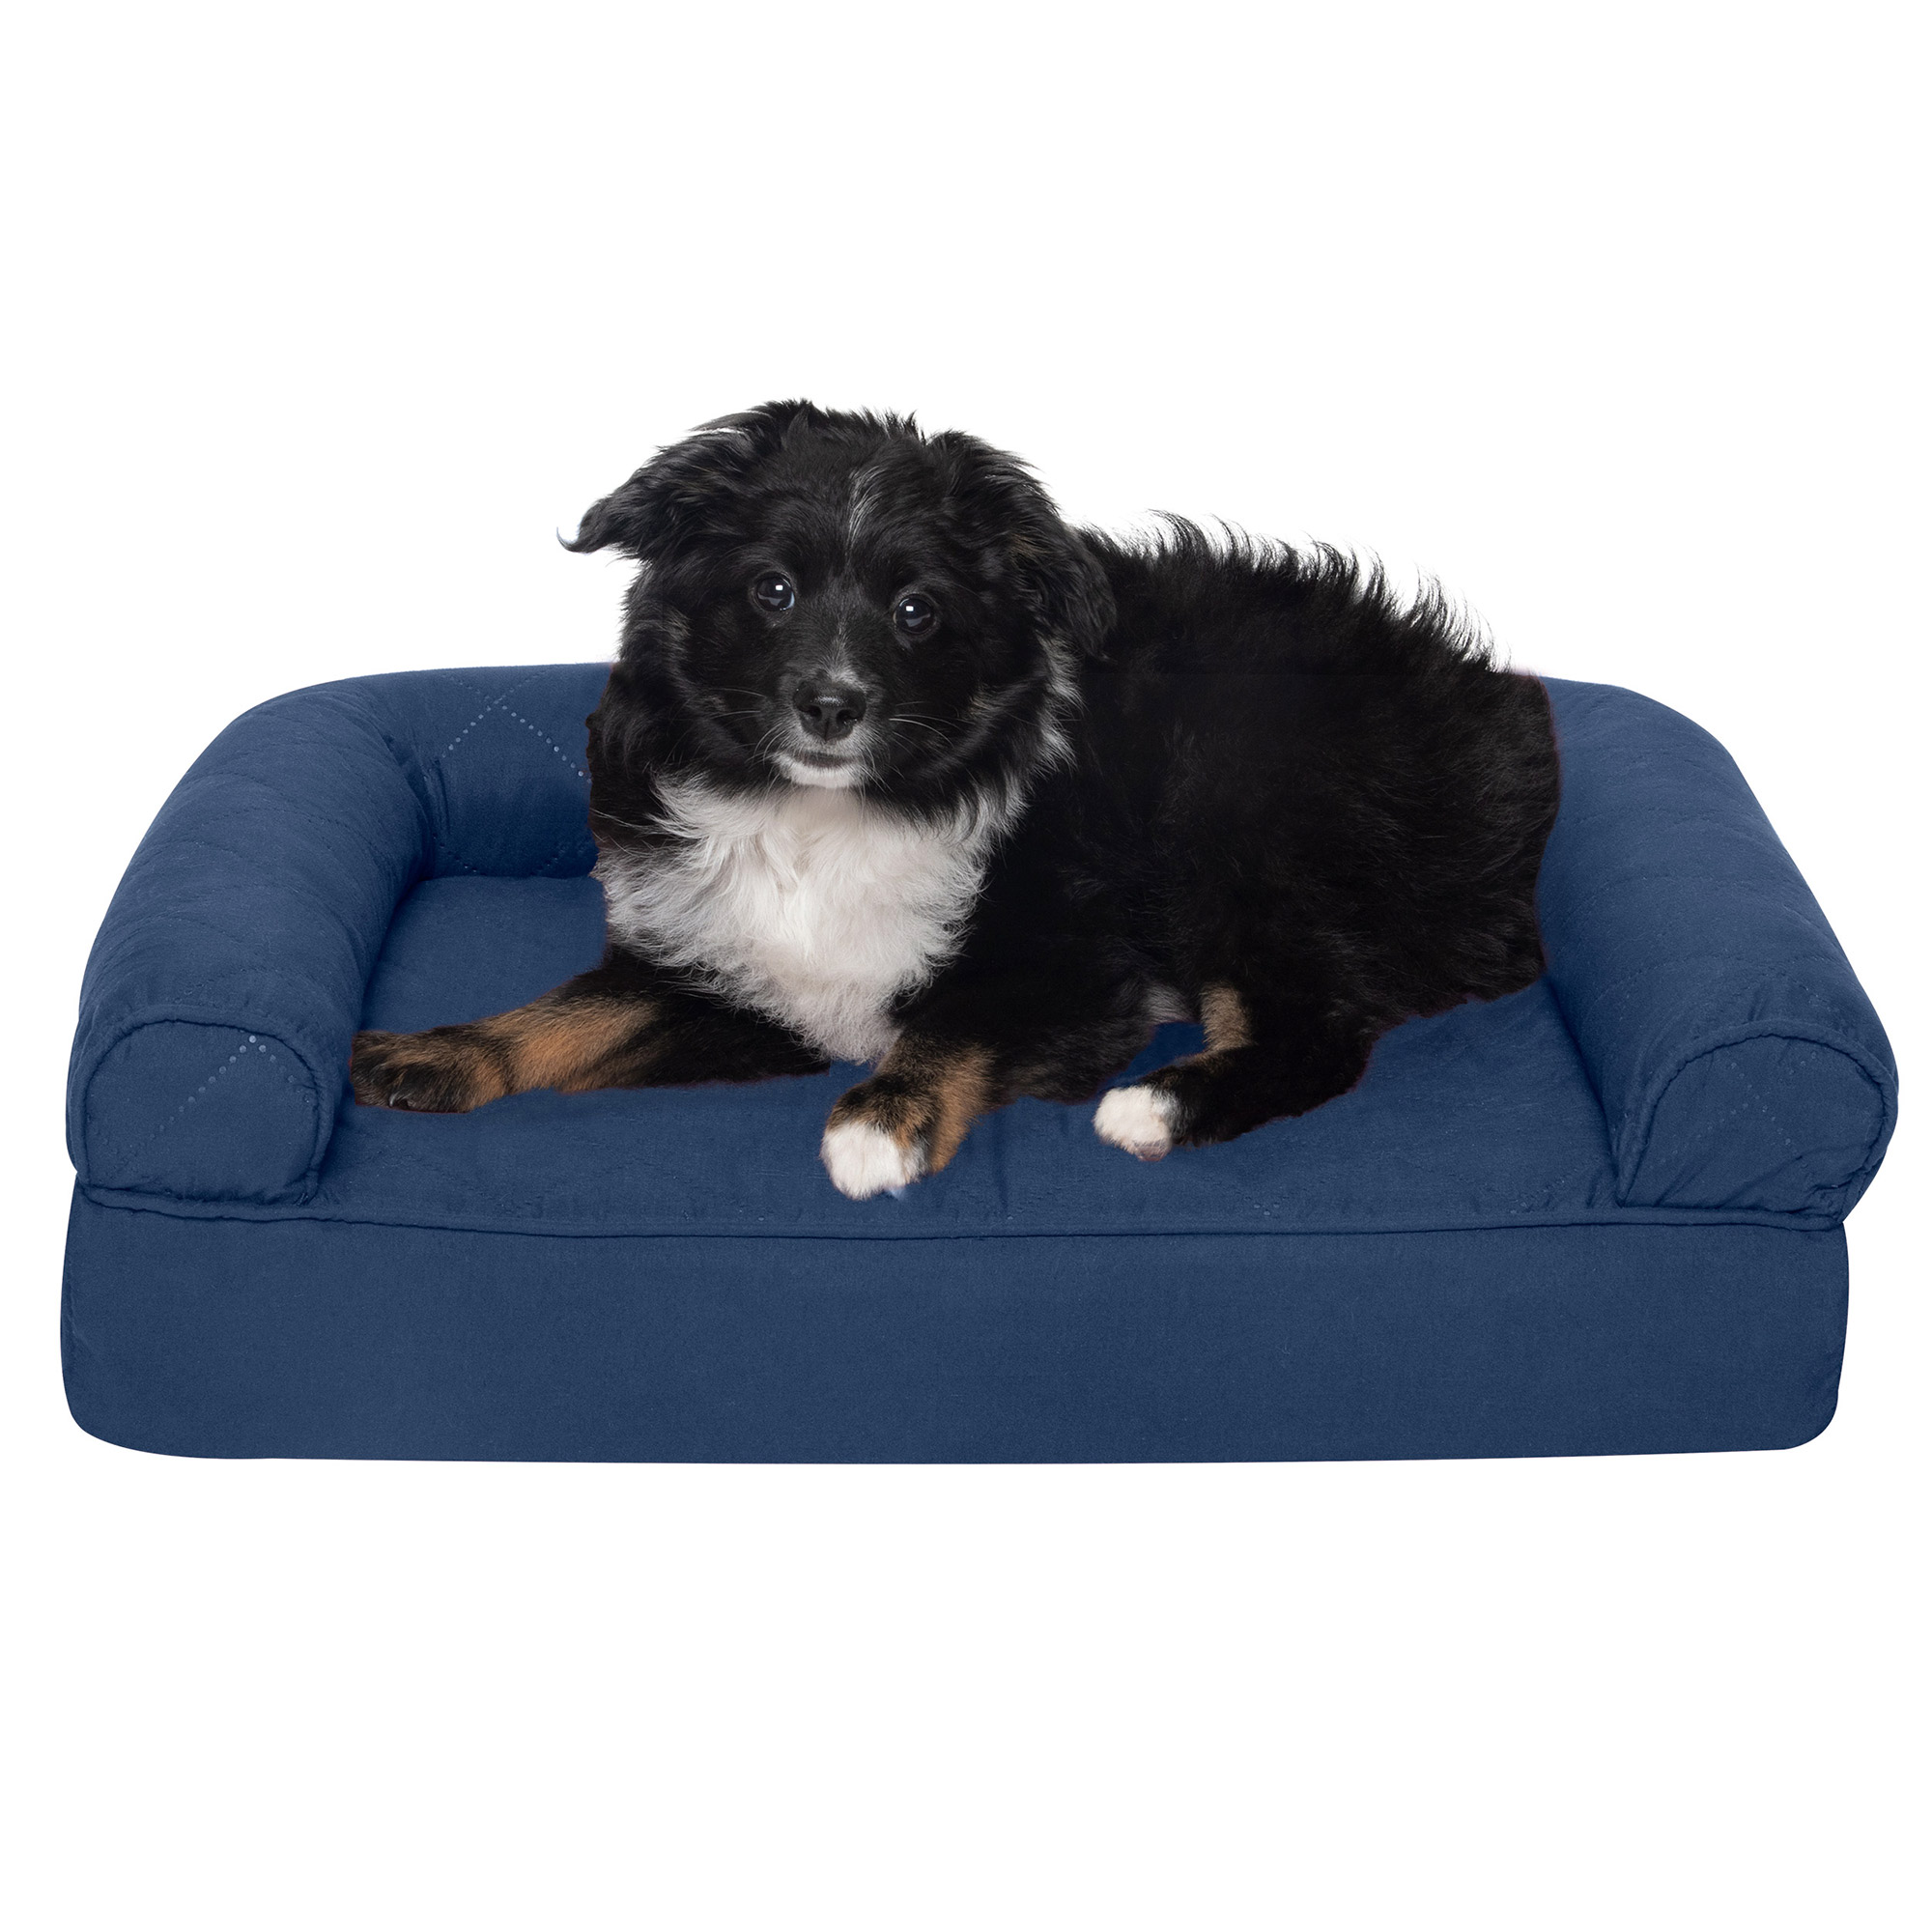 FurHaven | Orthopedic Quilted Sofa Pet Bed for Dogs & Cats, Navy, Small - image 5 of 13